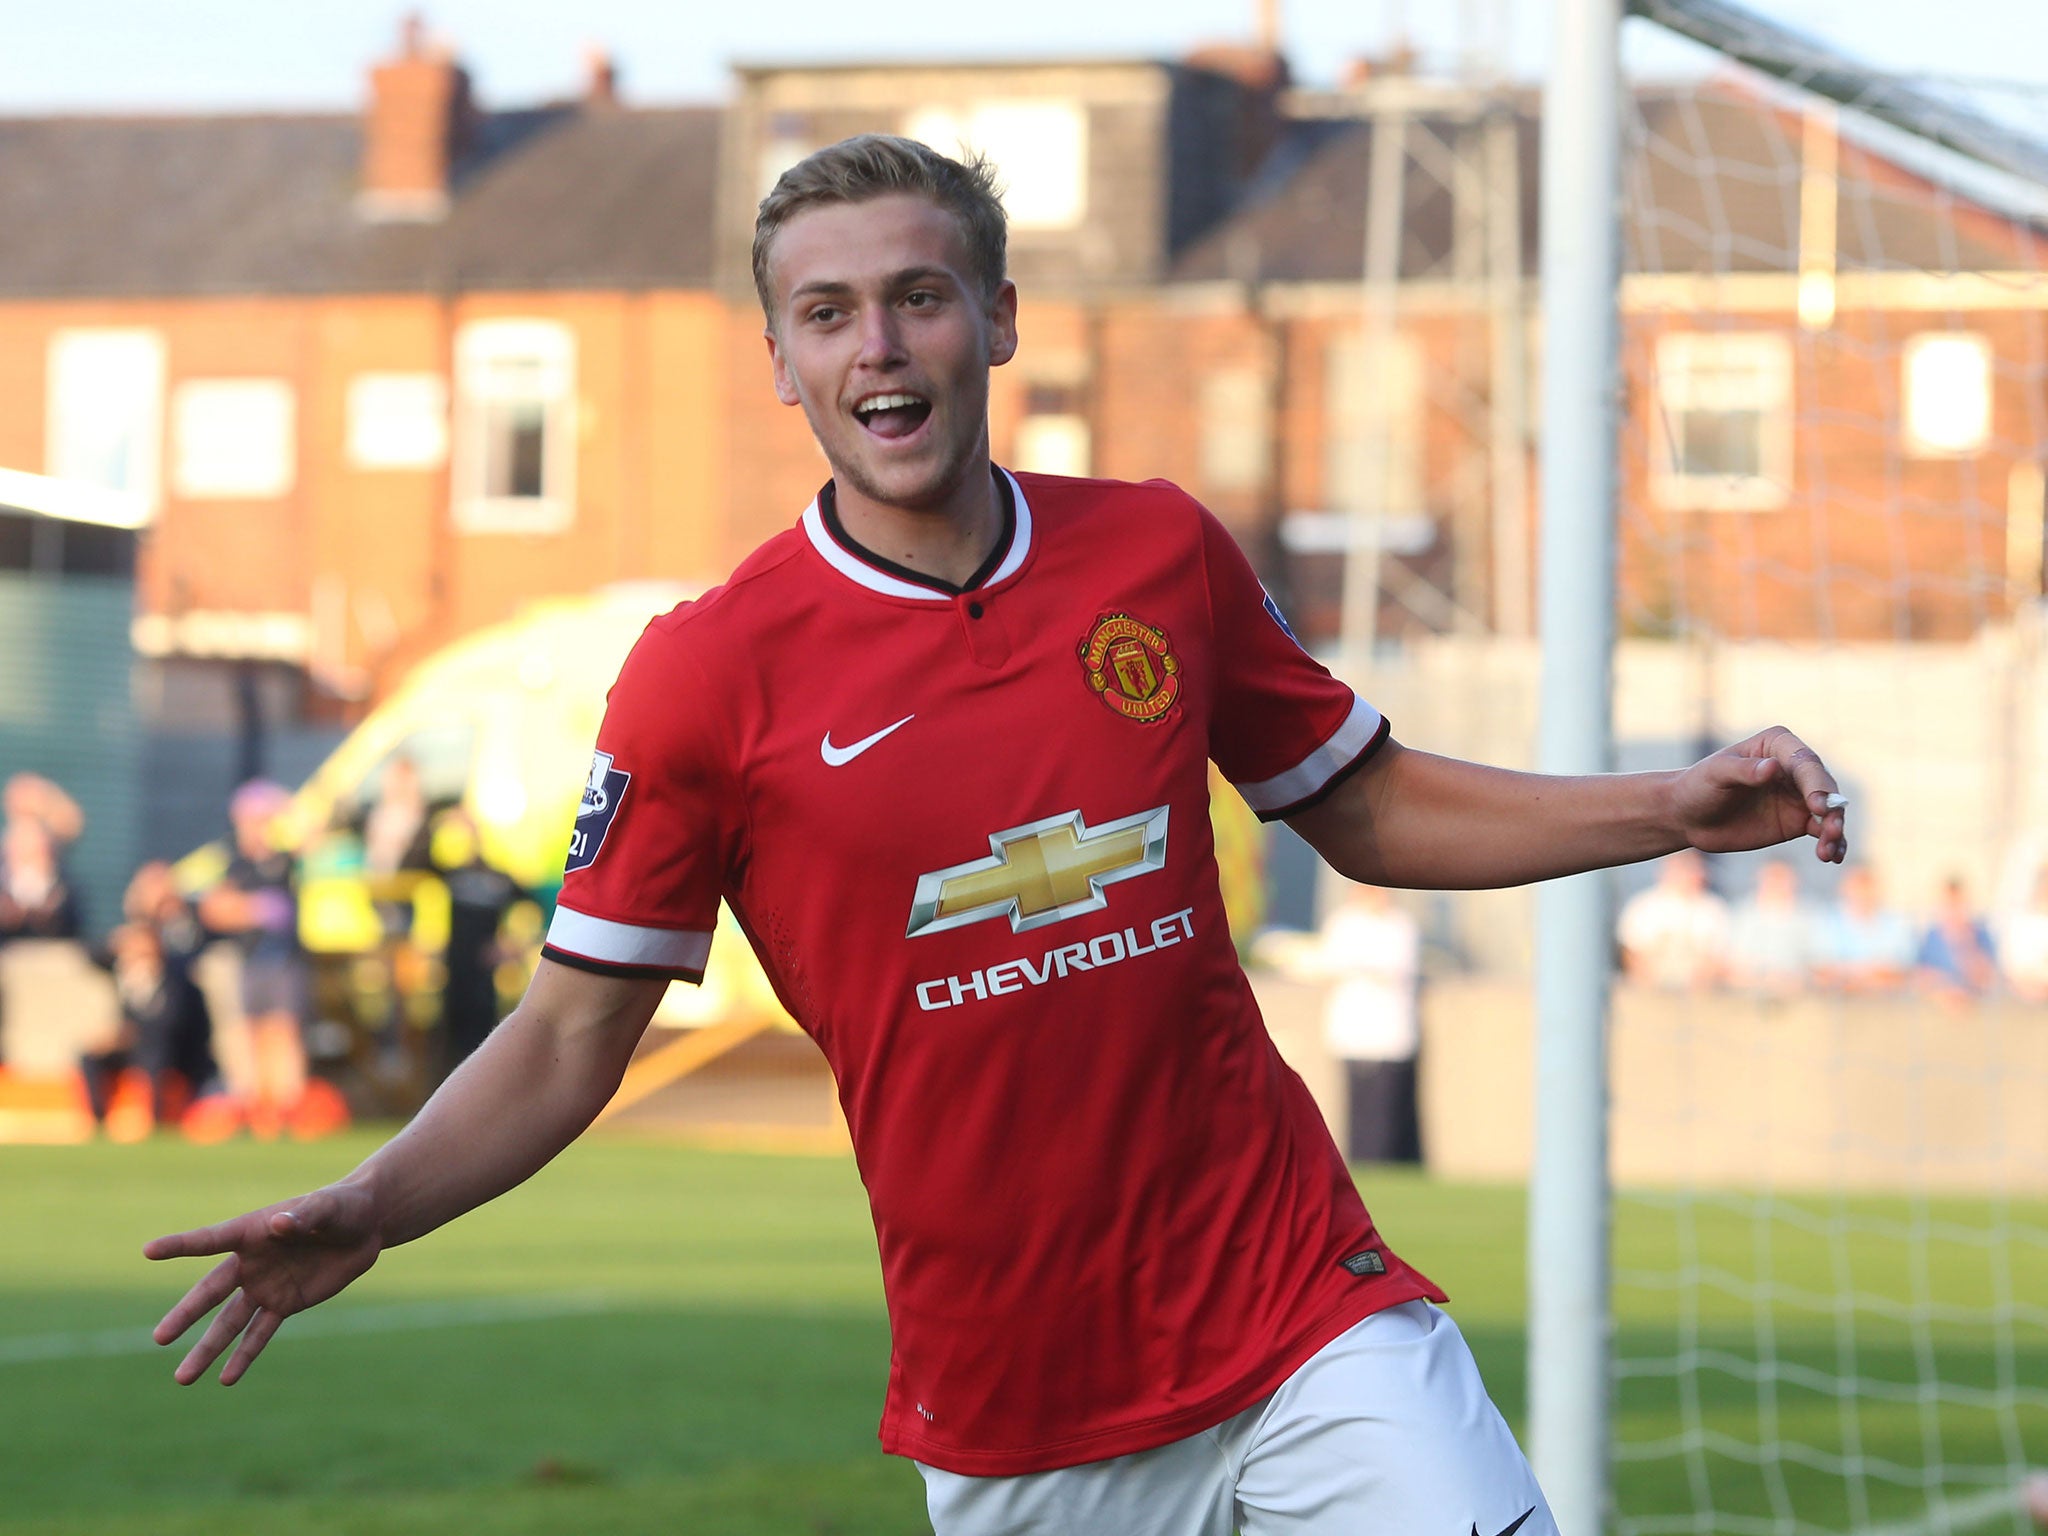 James Wilson, Manchester United's No 49